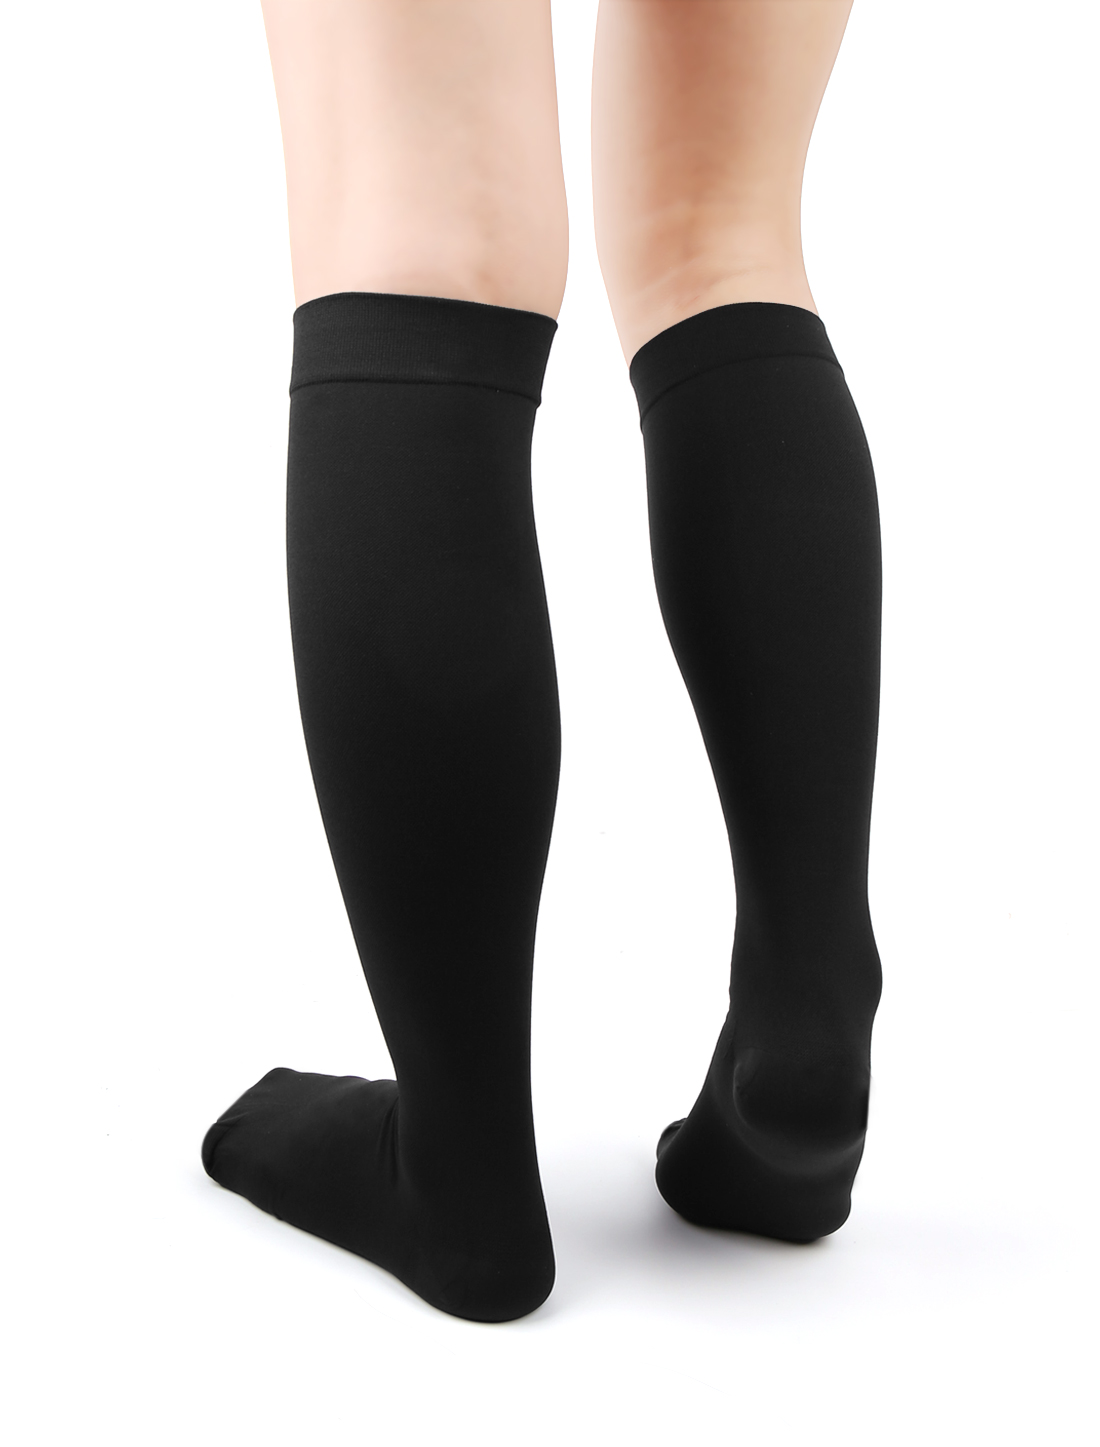 Unique Bargains 1 Pair Skin Color Knee High Stockings Calf Compression Shaper Sleeve Sock